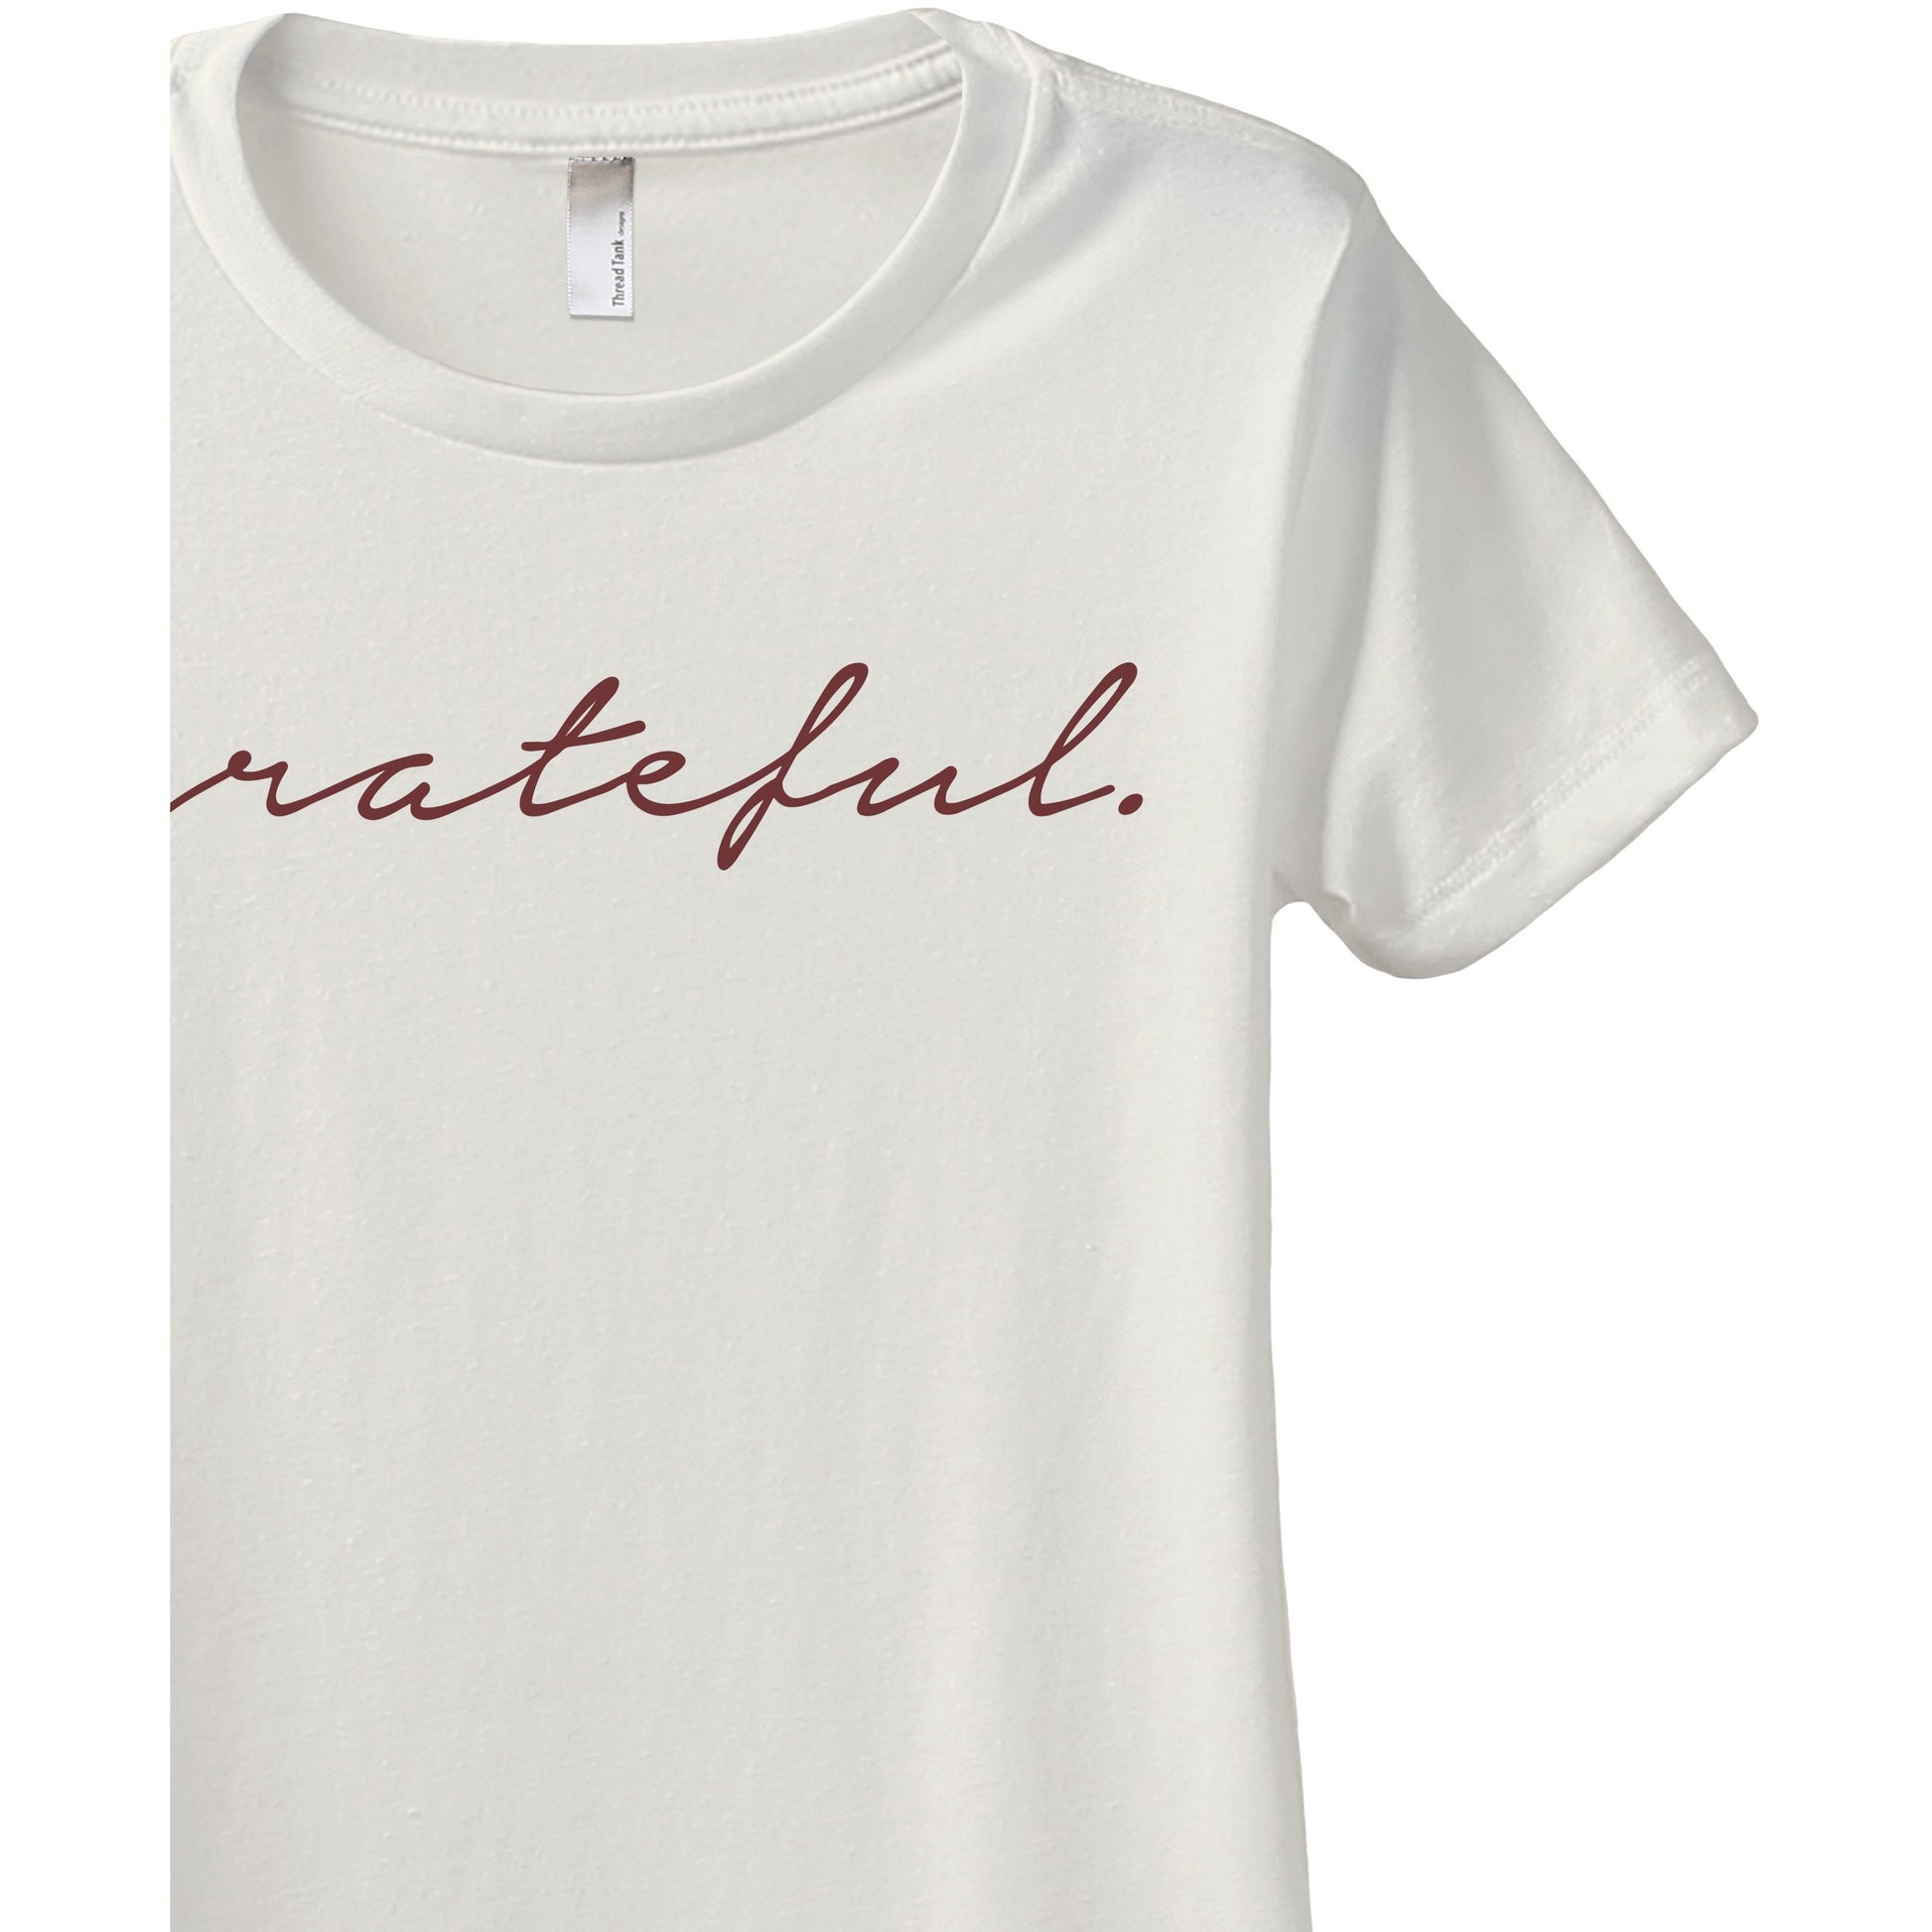 Grateful Women's Relaxed Crewneck T-Shirt Top Tee Vintage White Zoom Details
